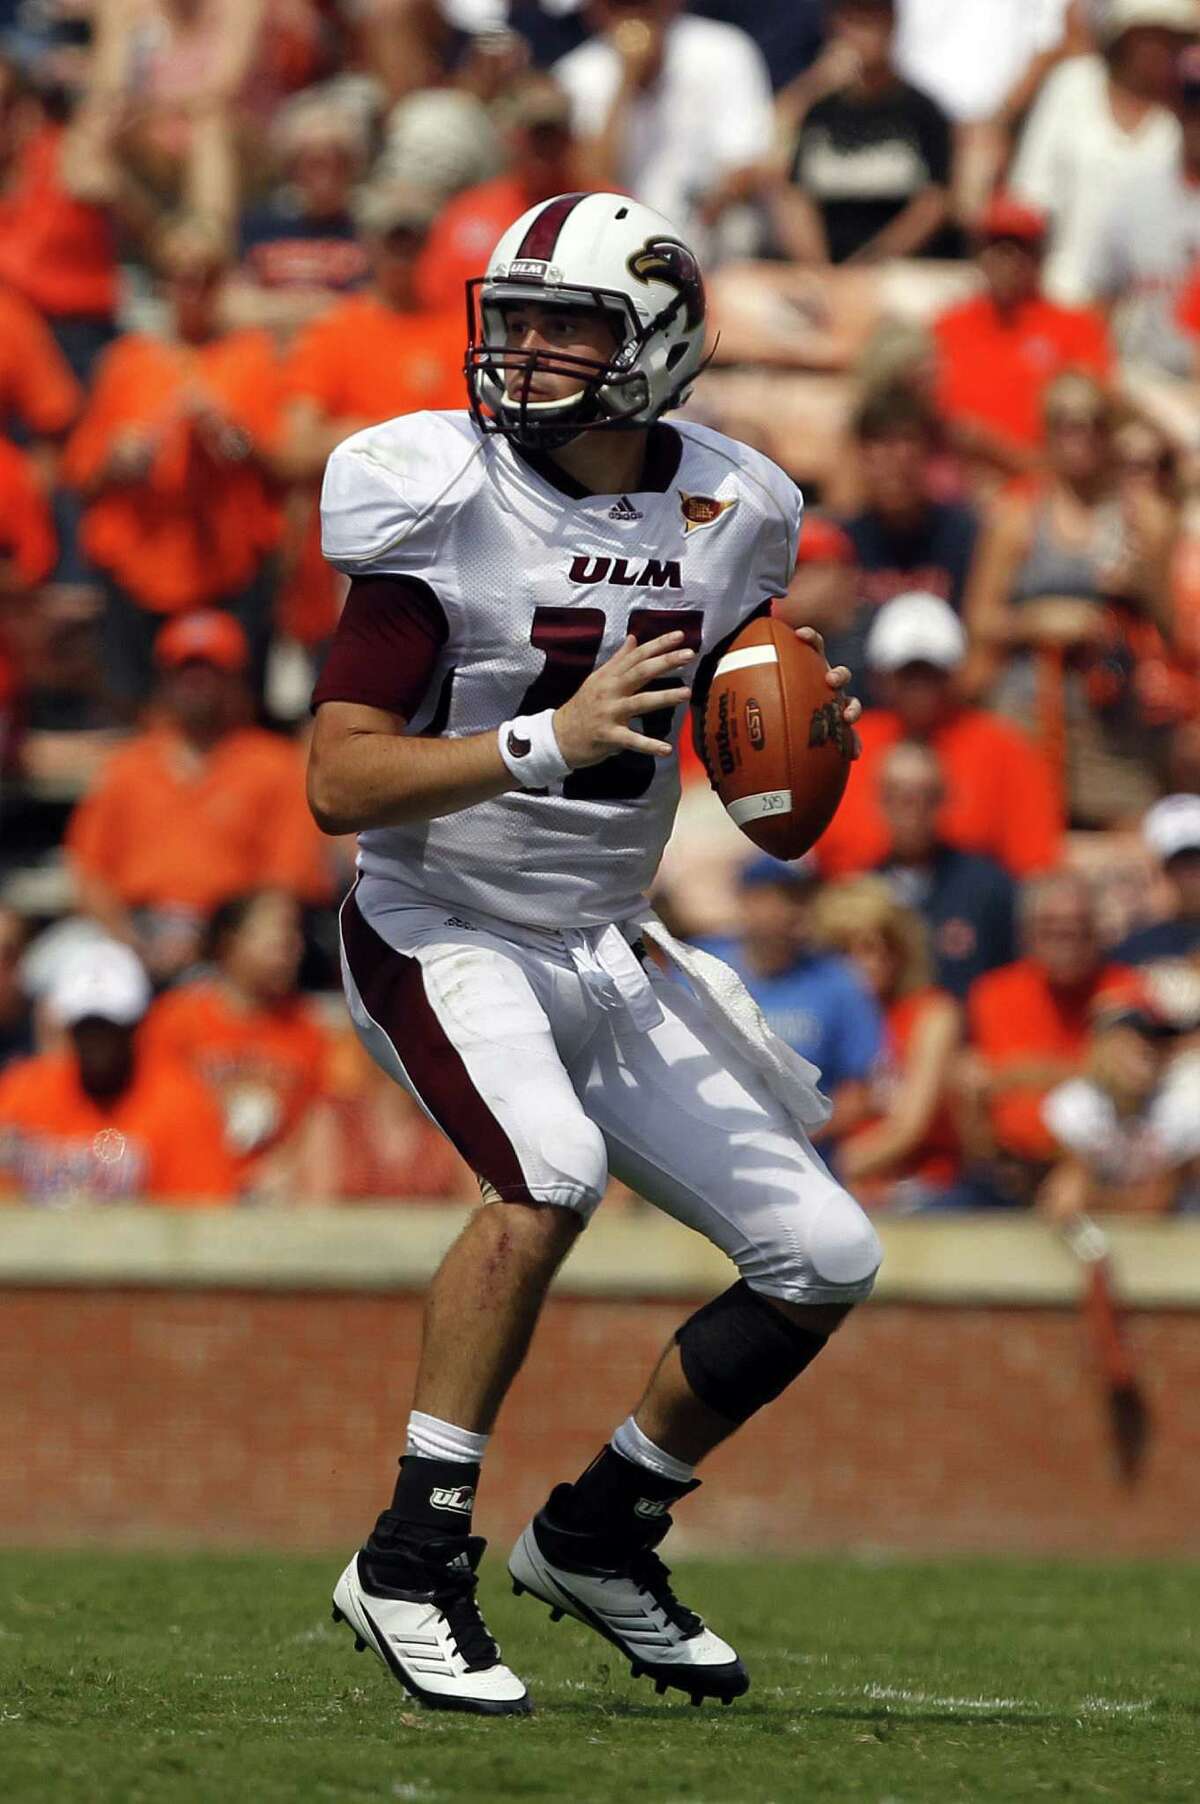 Louisiana-Monroe QB Kolton Browning threw for 3,049 yards and produced 36 touchdowns last year.